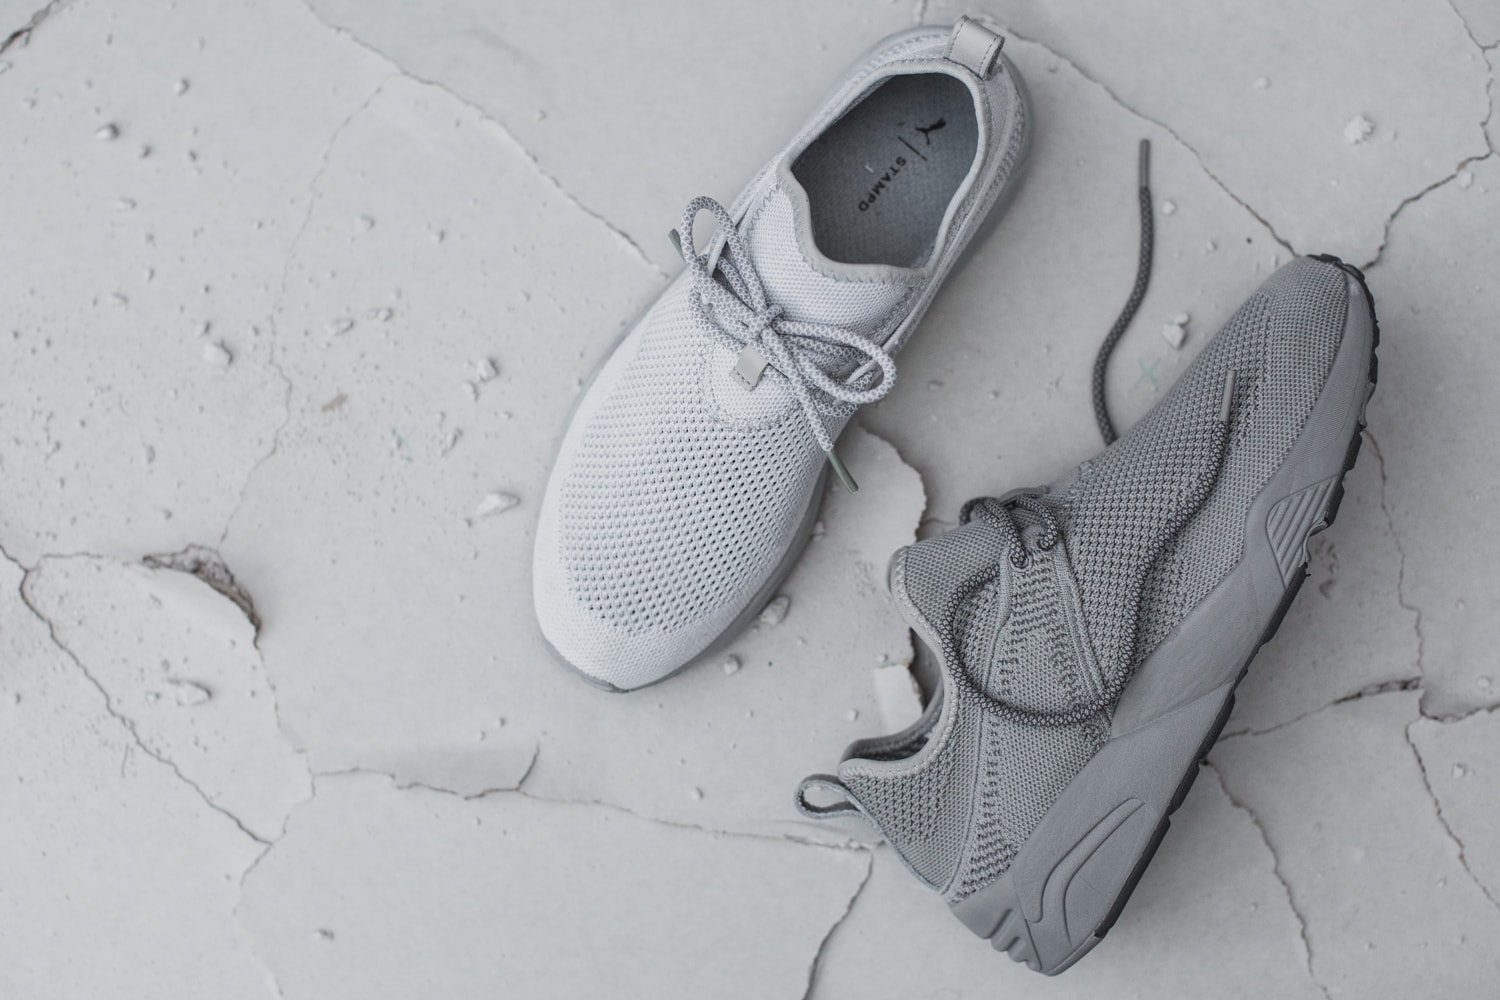 Stampd x PUMA “96 Hours” Collection